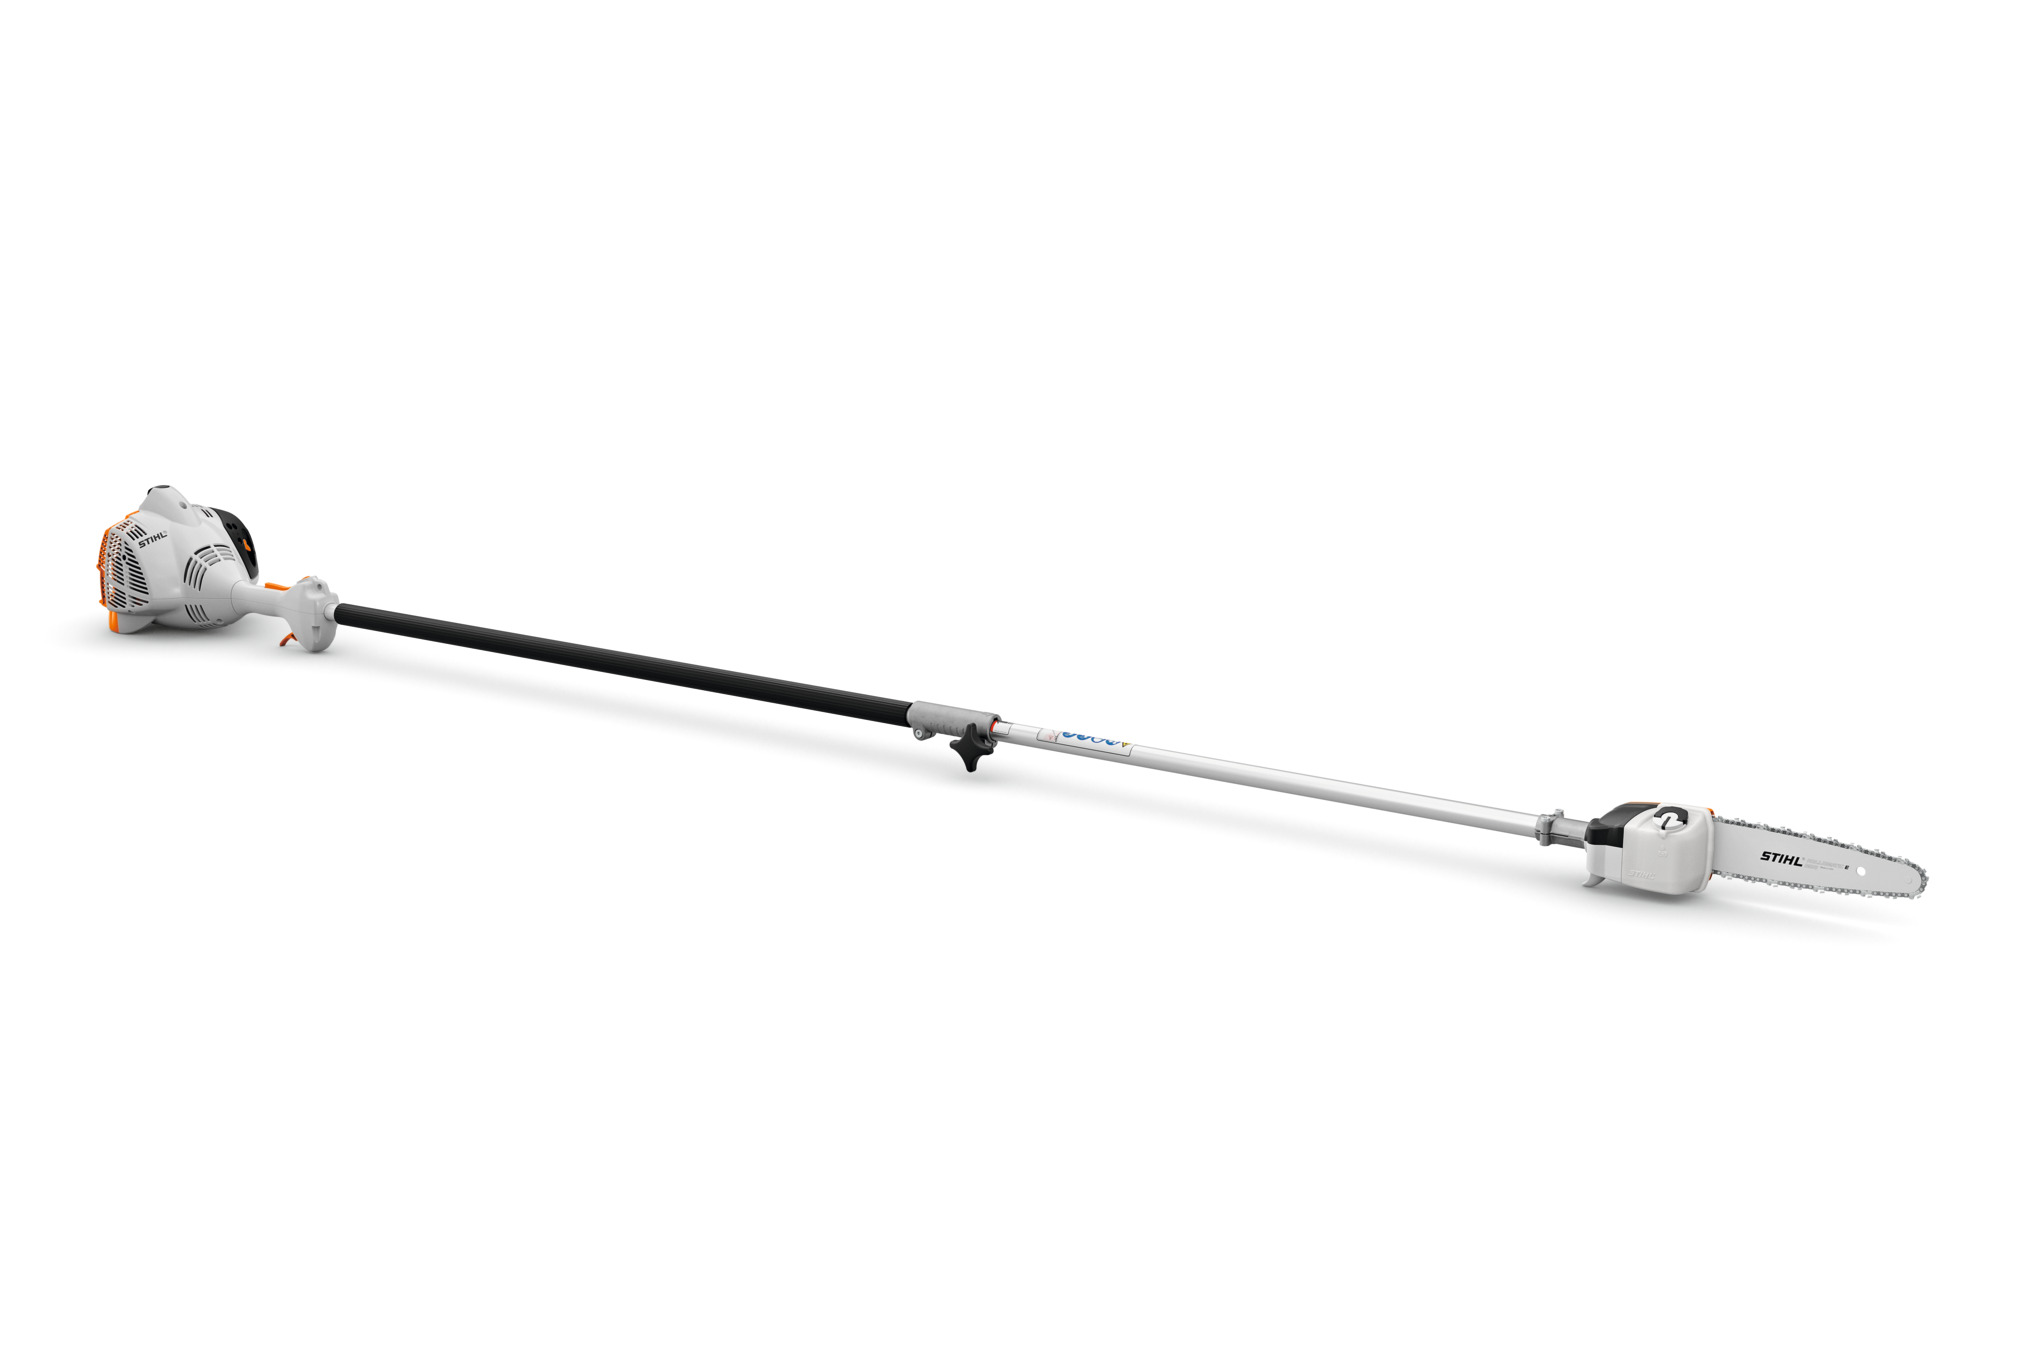 PP 600 Telescoping Pole Saw, Extended Reach Pole Saw